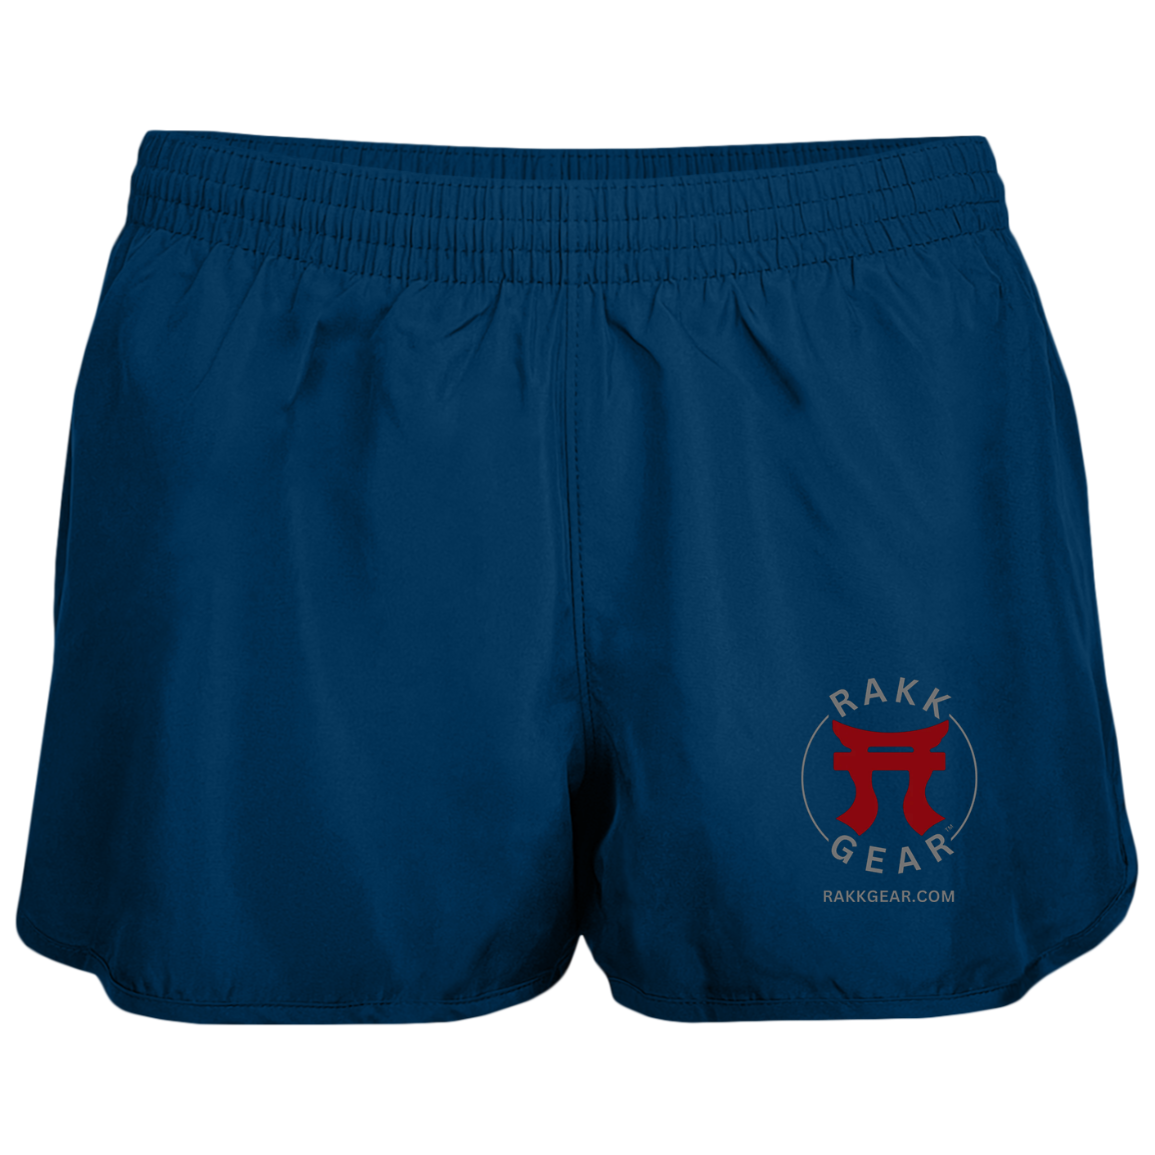 "Rakkgear Women's Wayfarer Running Shorts in Navy, ideal for active pursuits with comfort and style in mind."